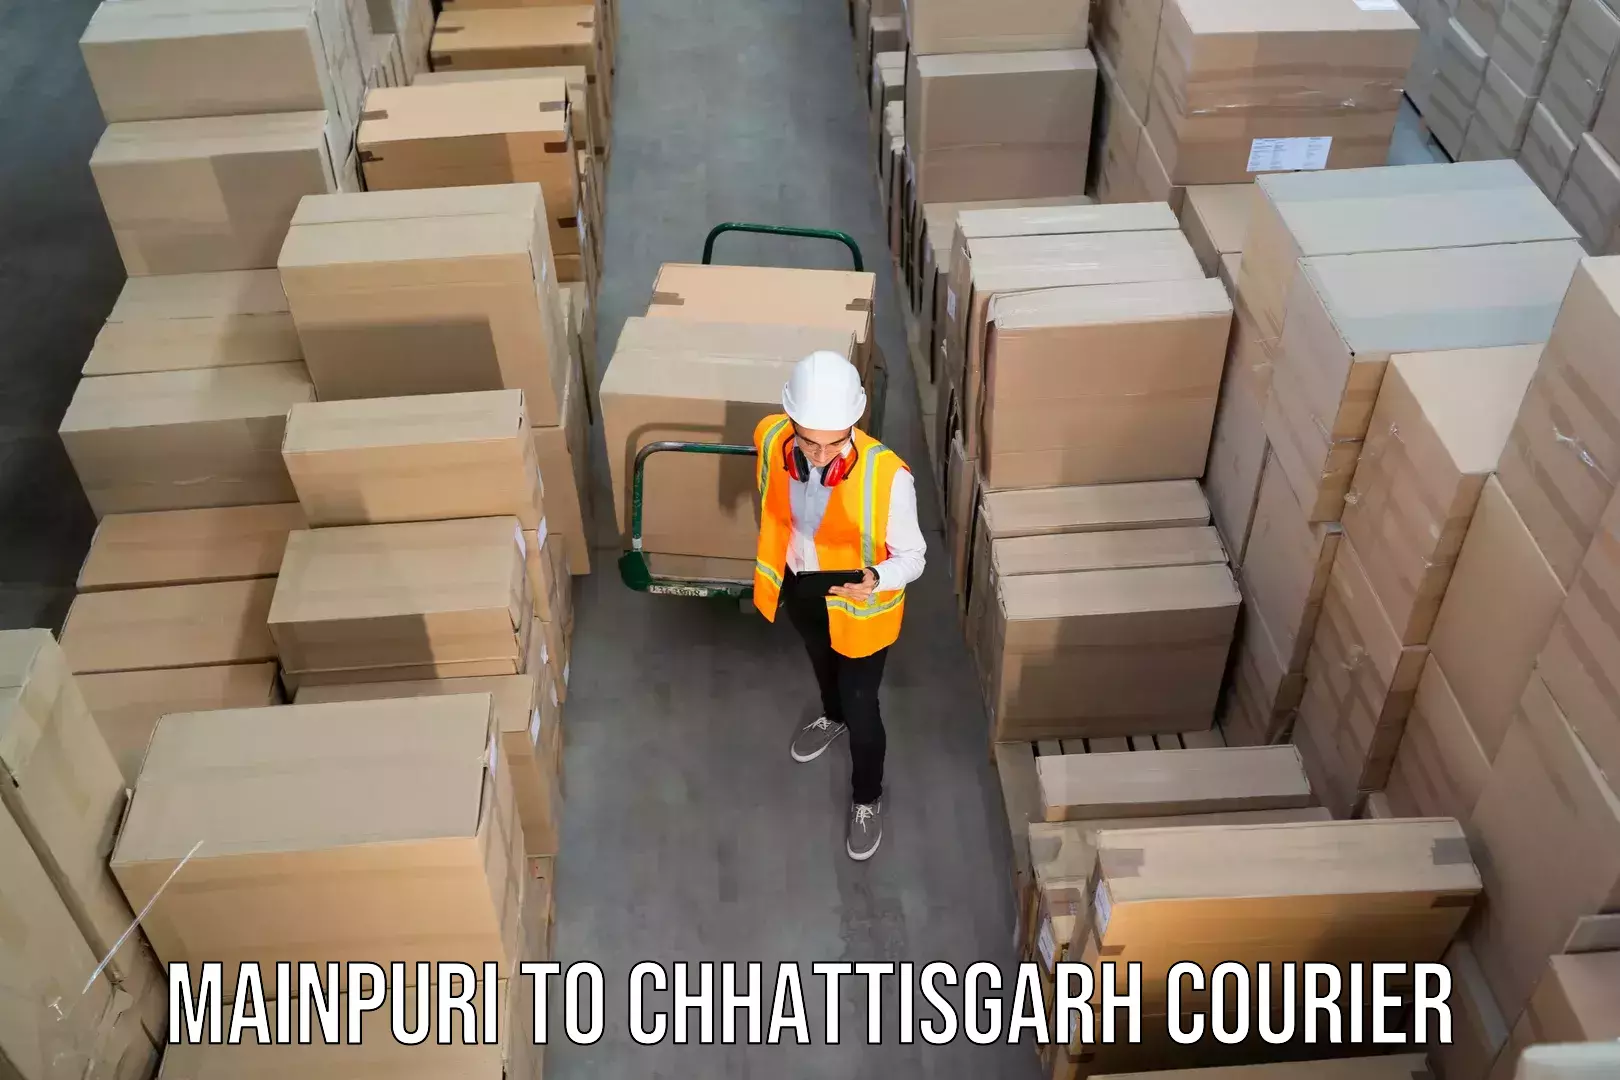 State-of-the-art courier technology Mainpuri to Bilaspur